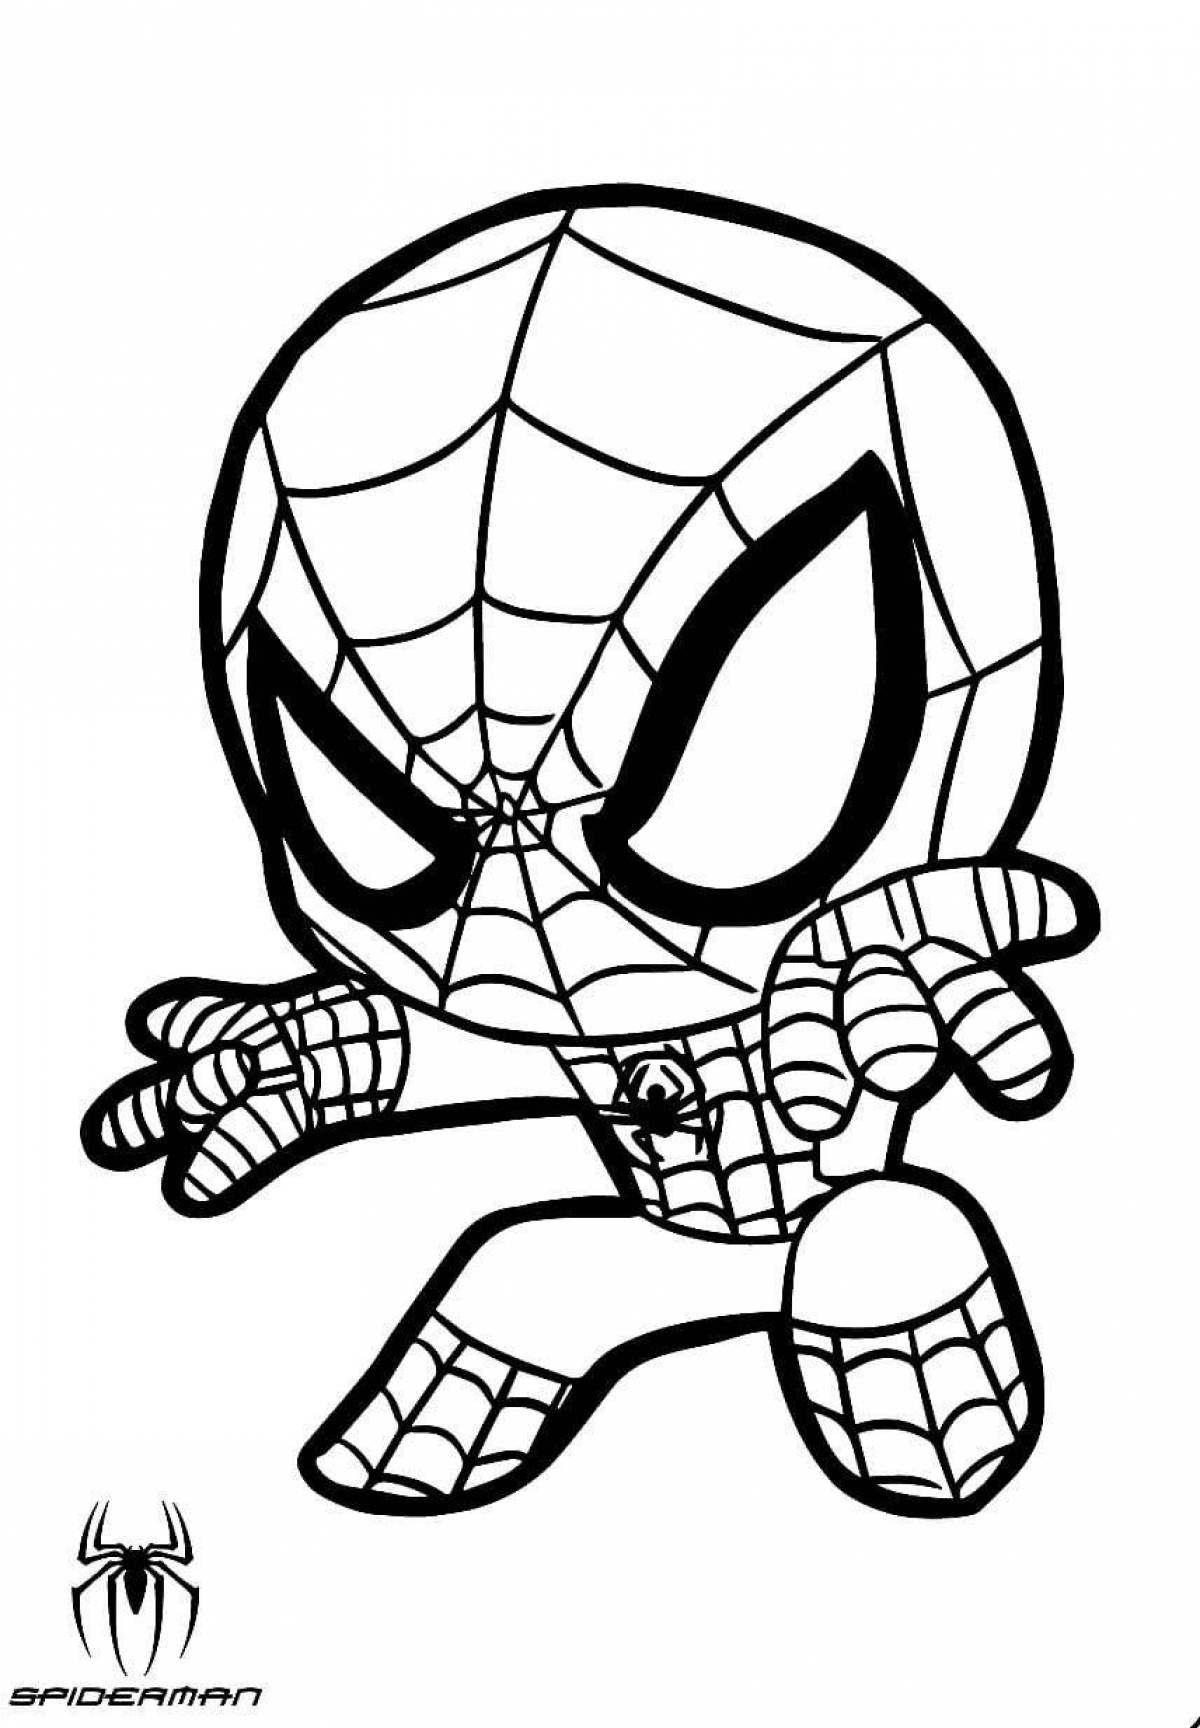 Spiderman's richly colored coloring page